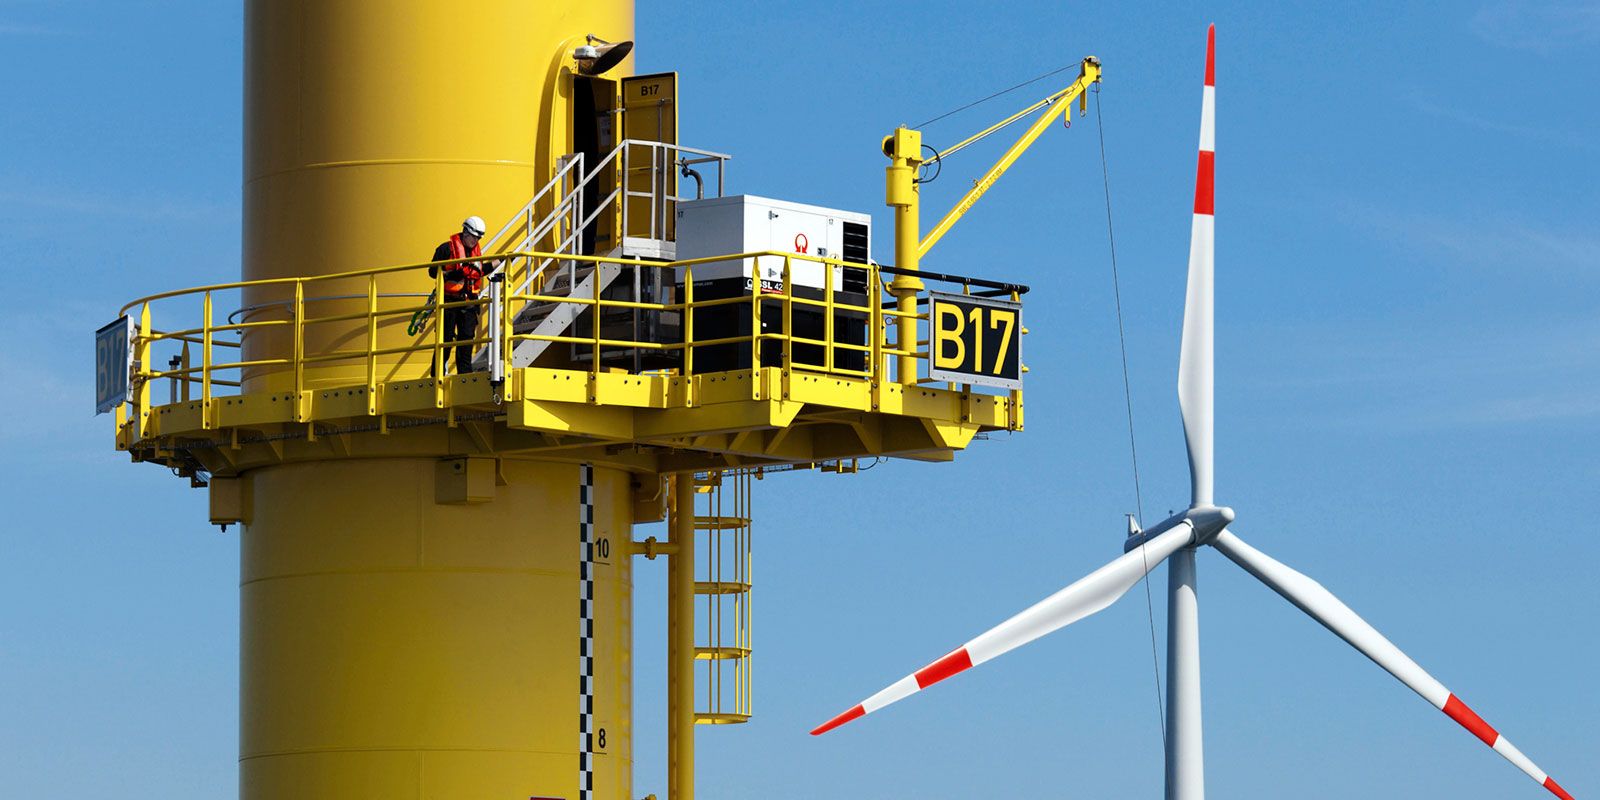 Service technician stands on a platform on the mast of a wind turbine